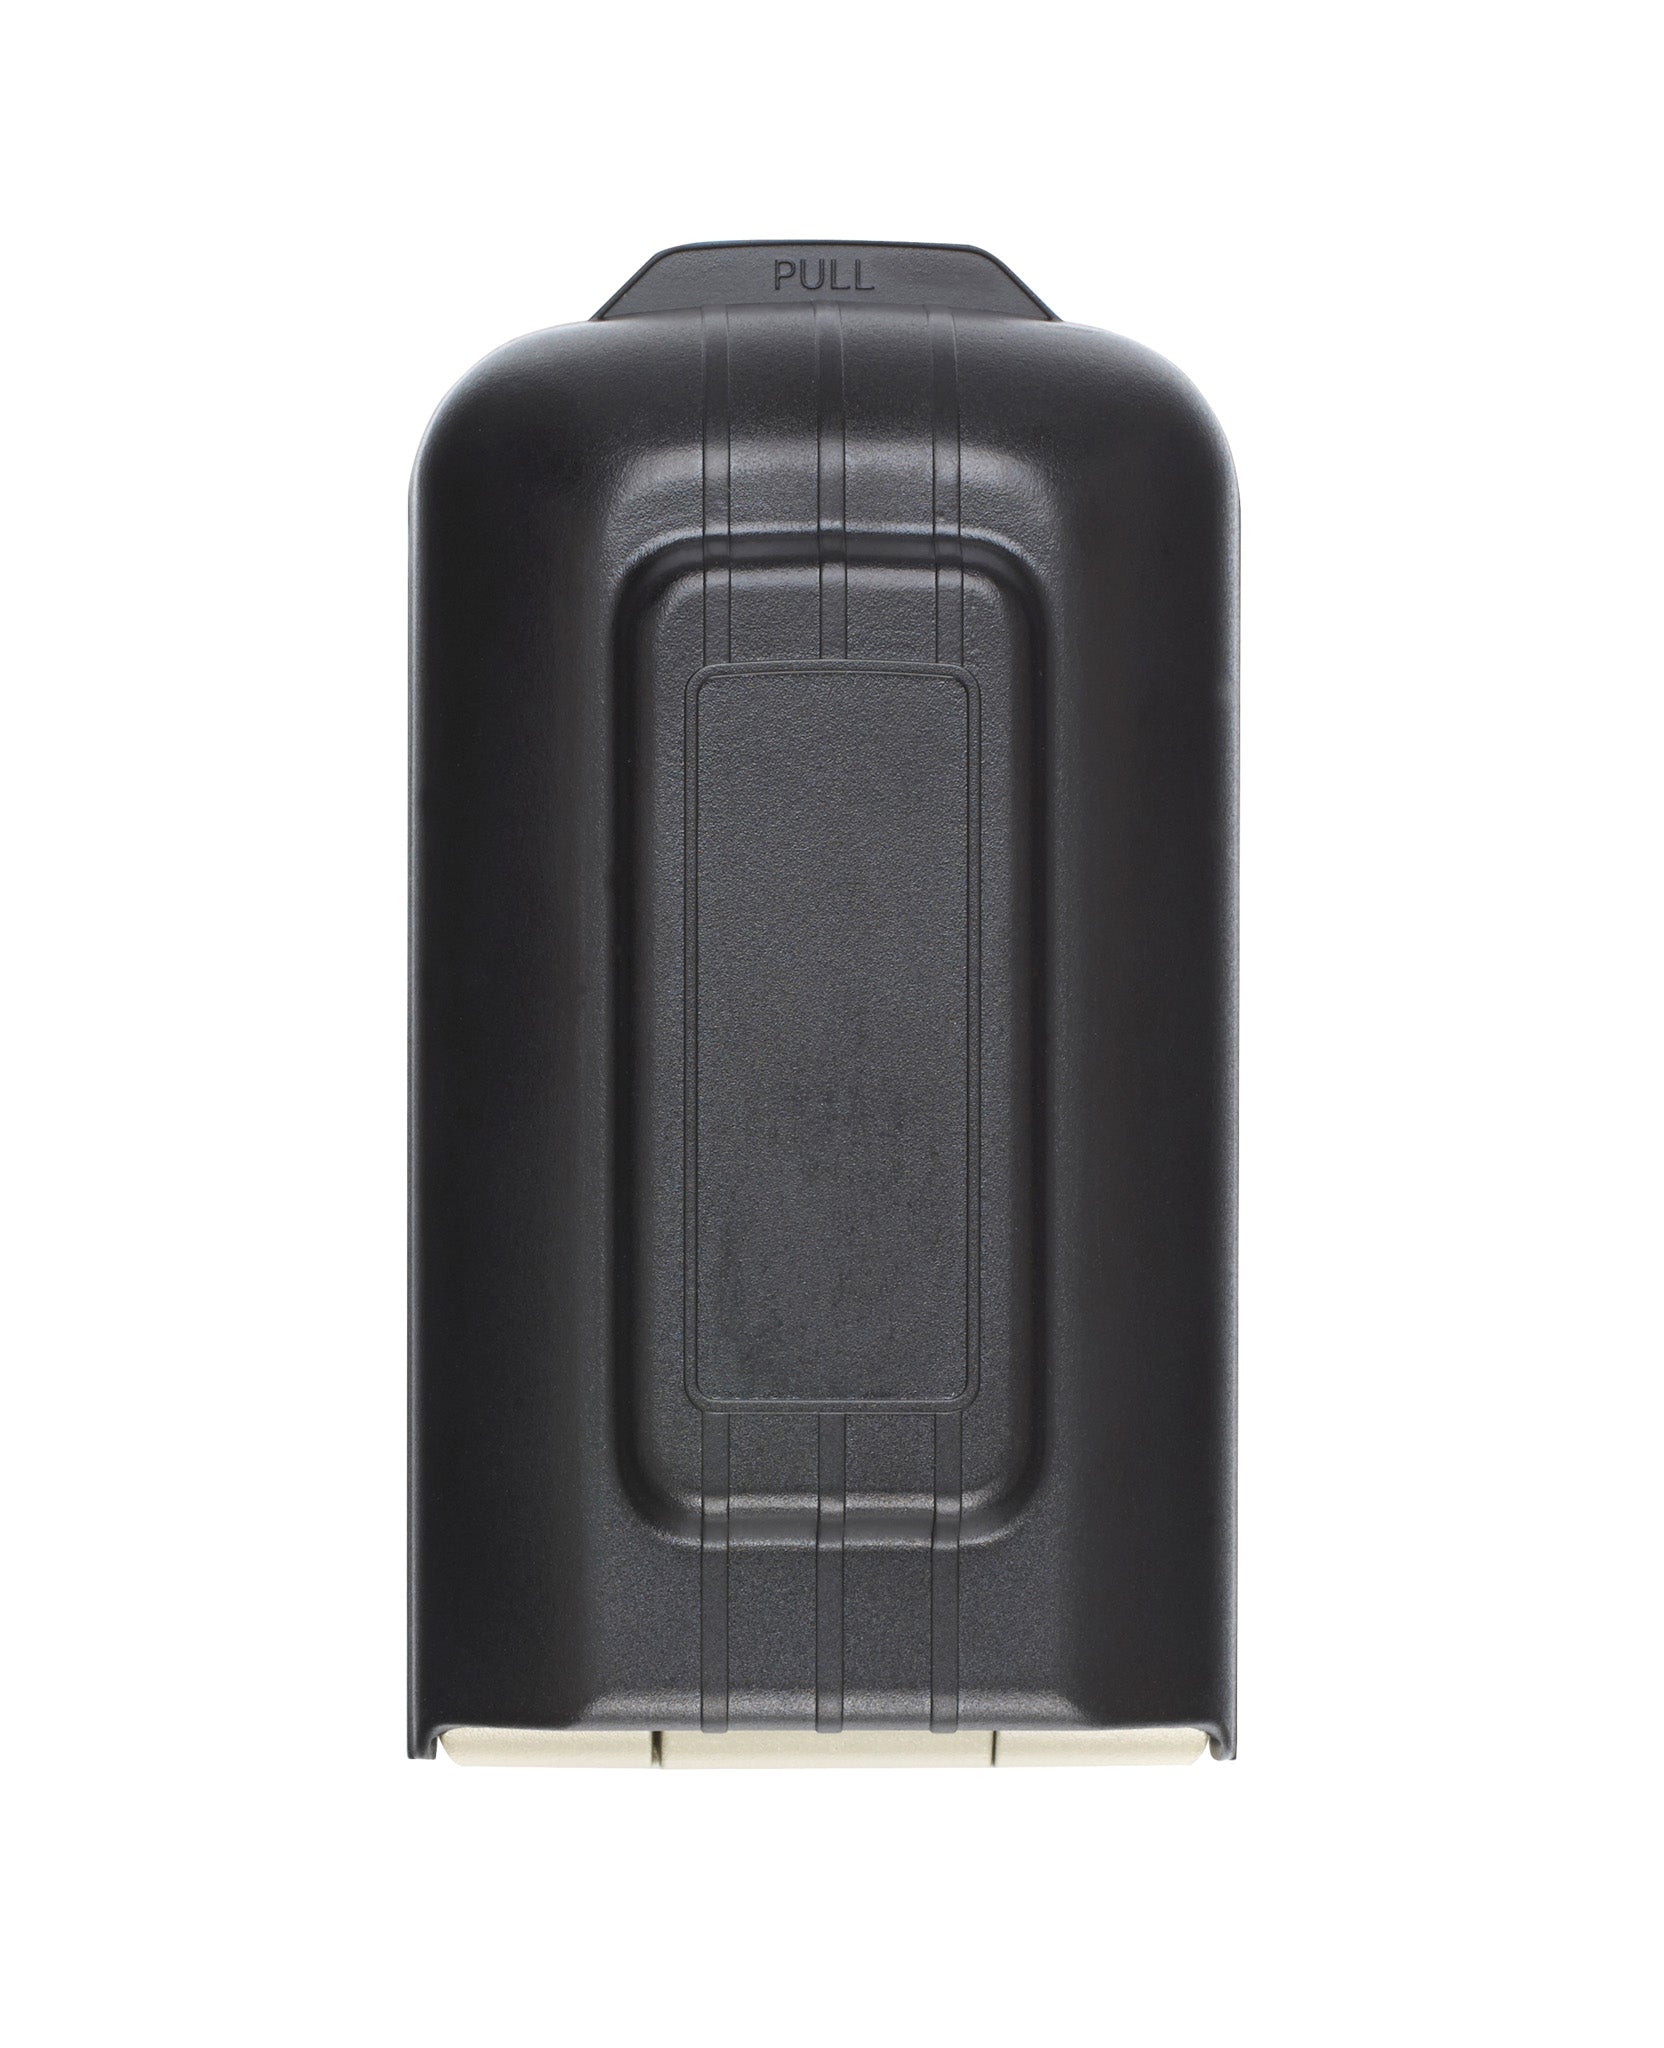 Black plastic weather cover for police preferred range at The Key Safe Company